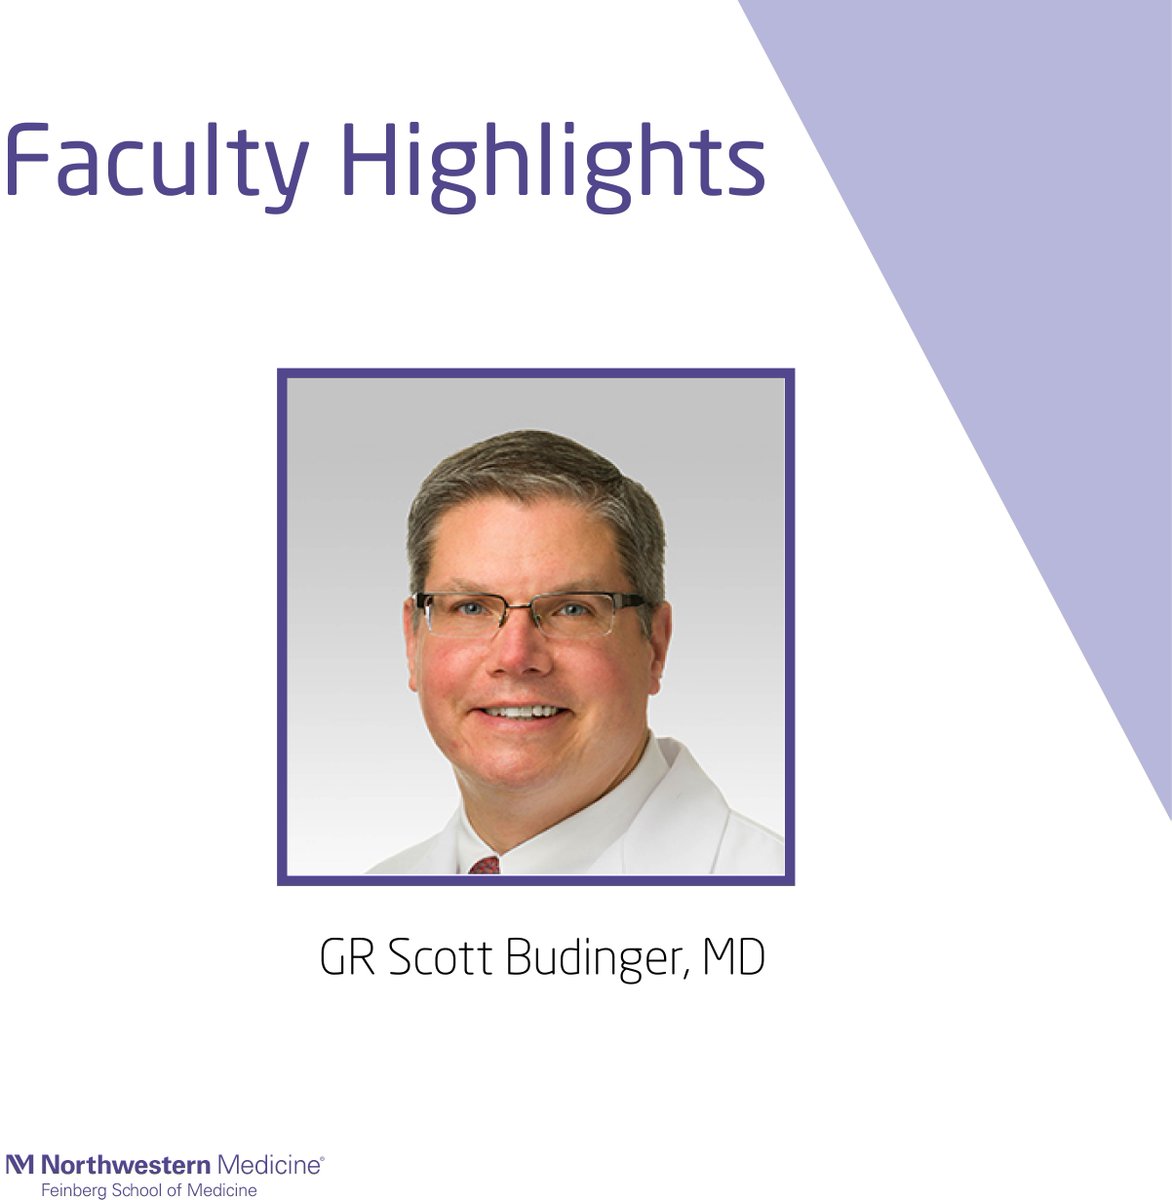 #Congratulations to GR Scott Budinger, MD for being named the #FacultyMentor of the Year by our Medical Faculty Council! @NM_Lung